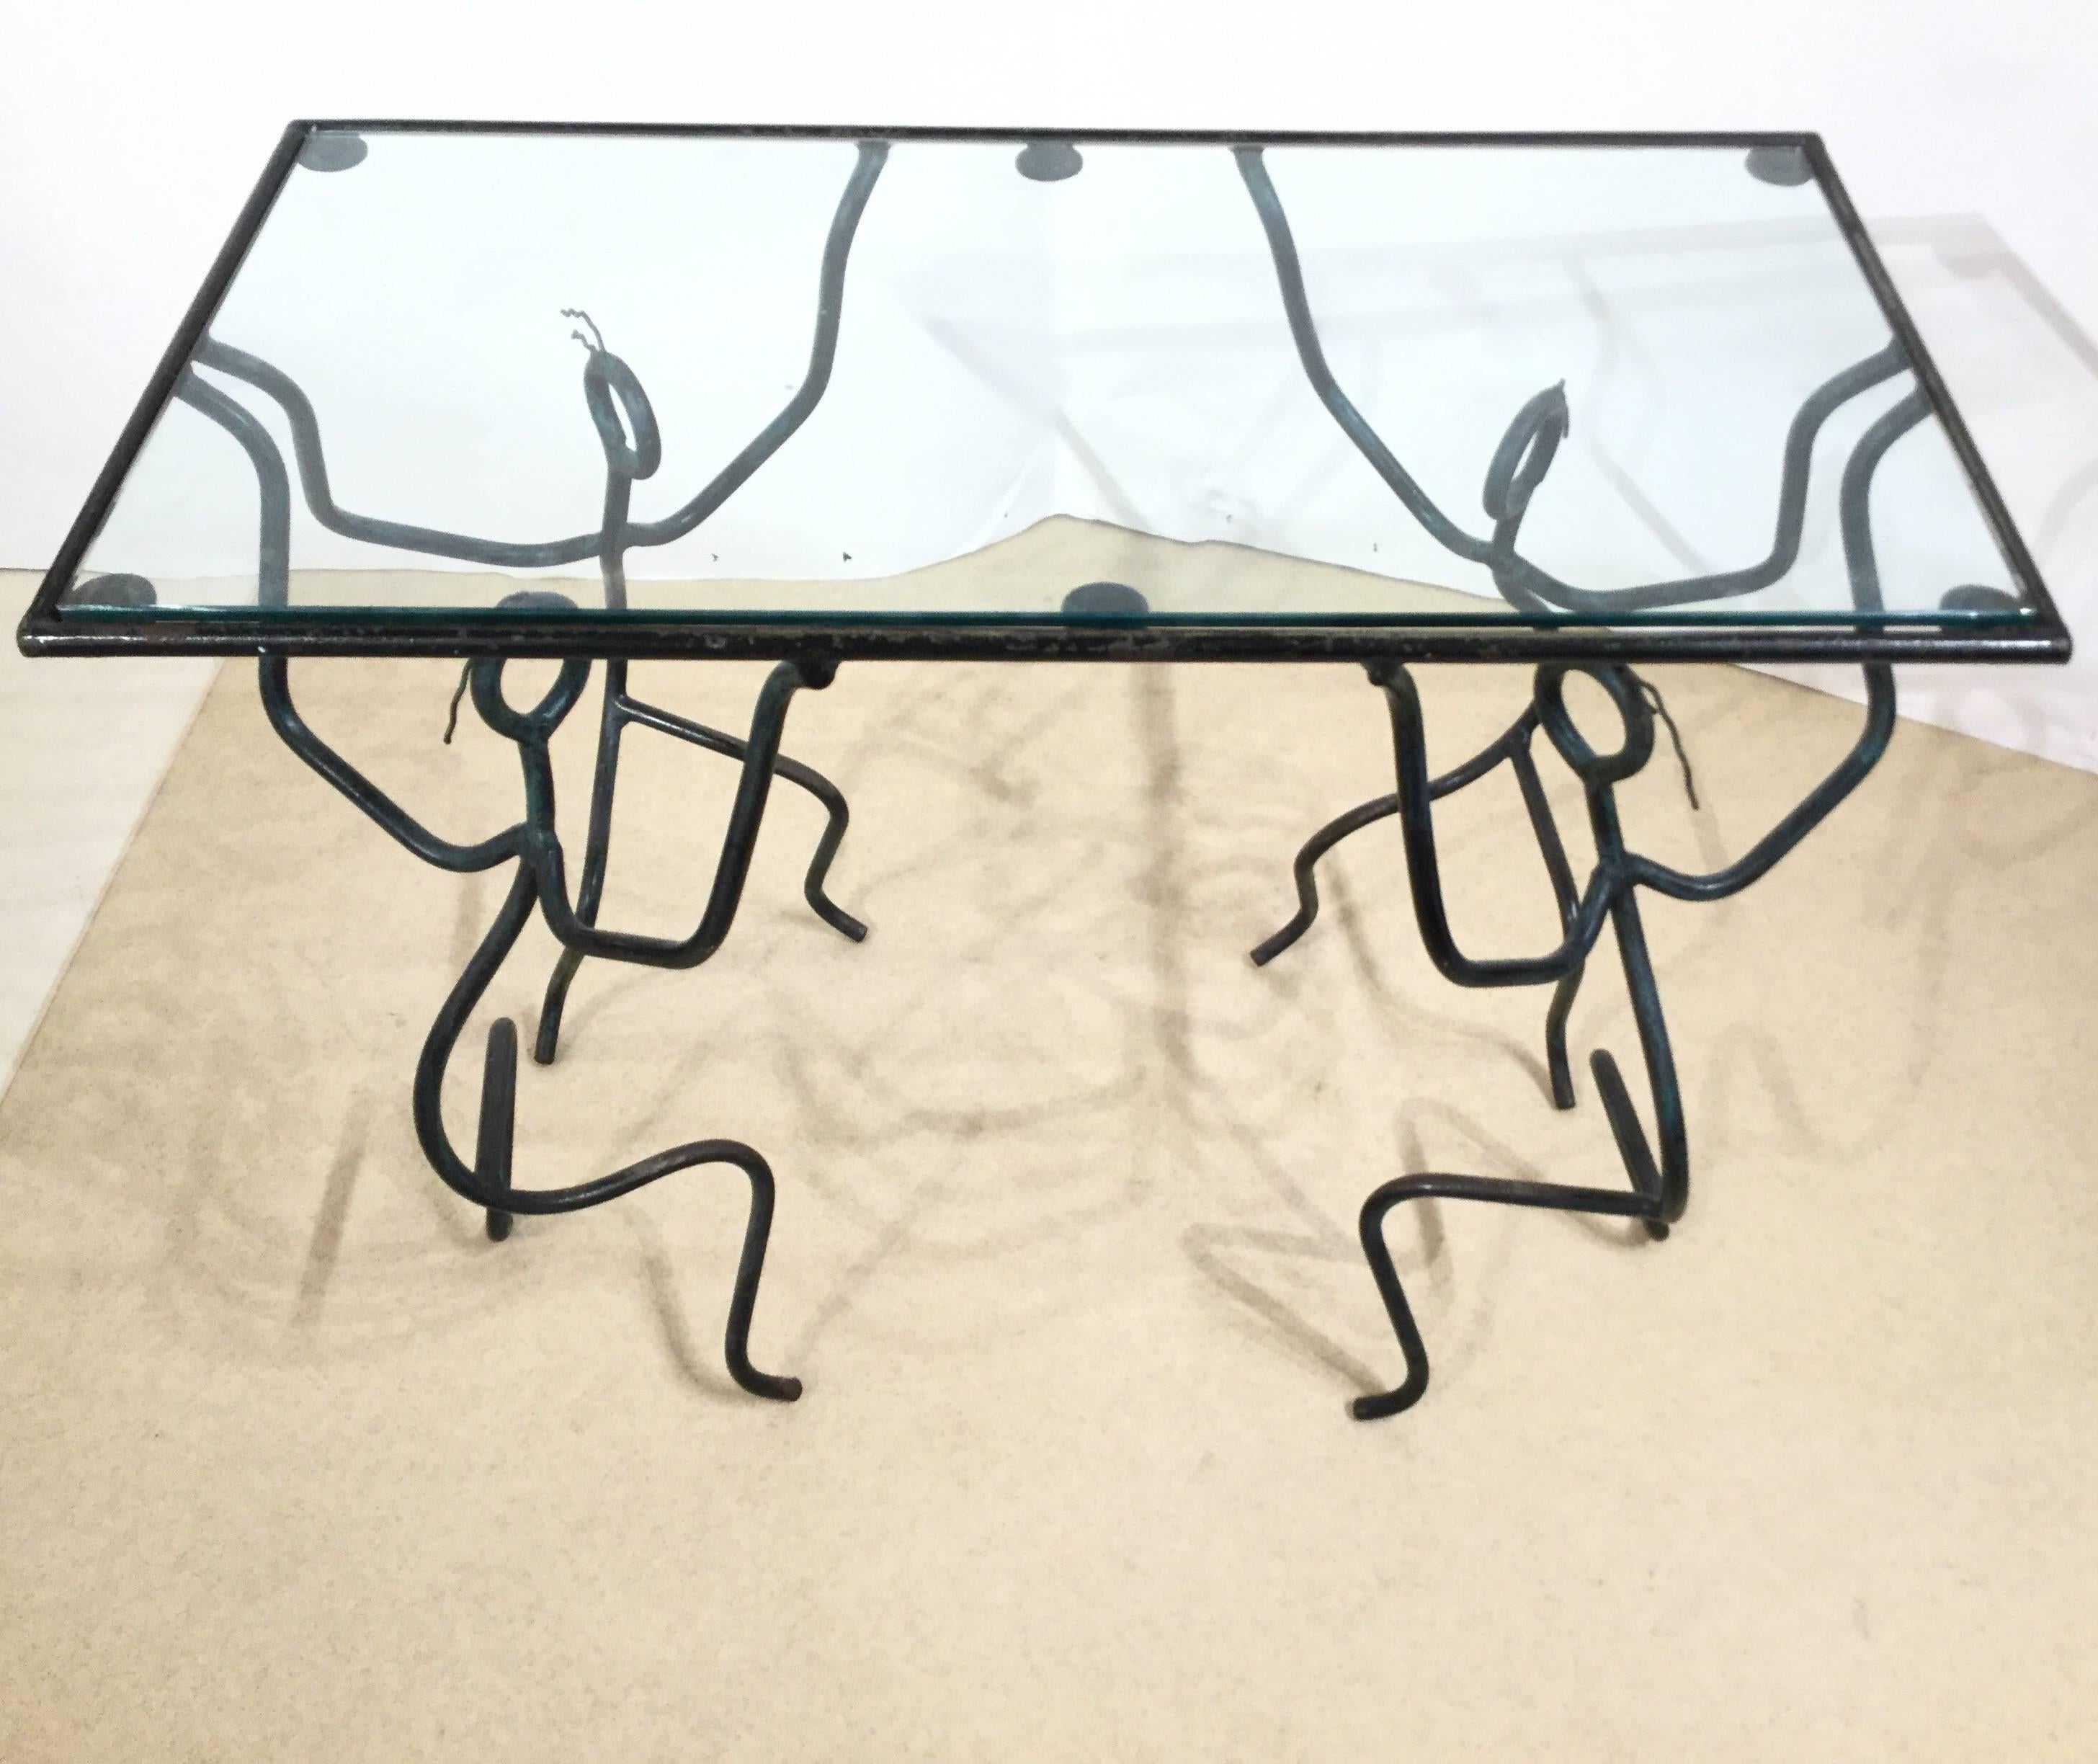 A beautiful coffee table in Iron. Four stylised iron men hold the glass top.
In good vintage condition.